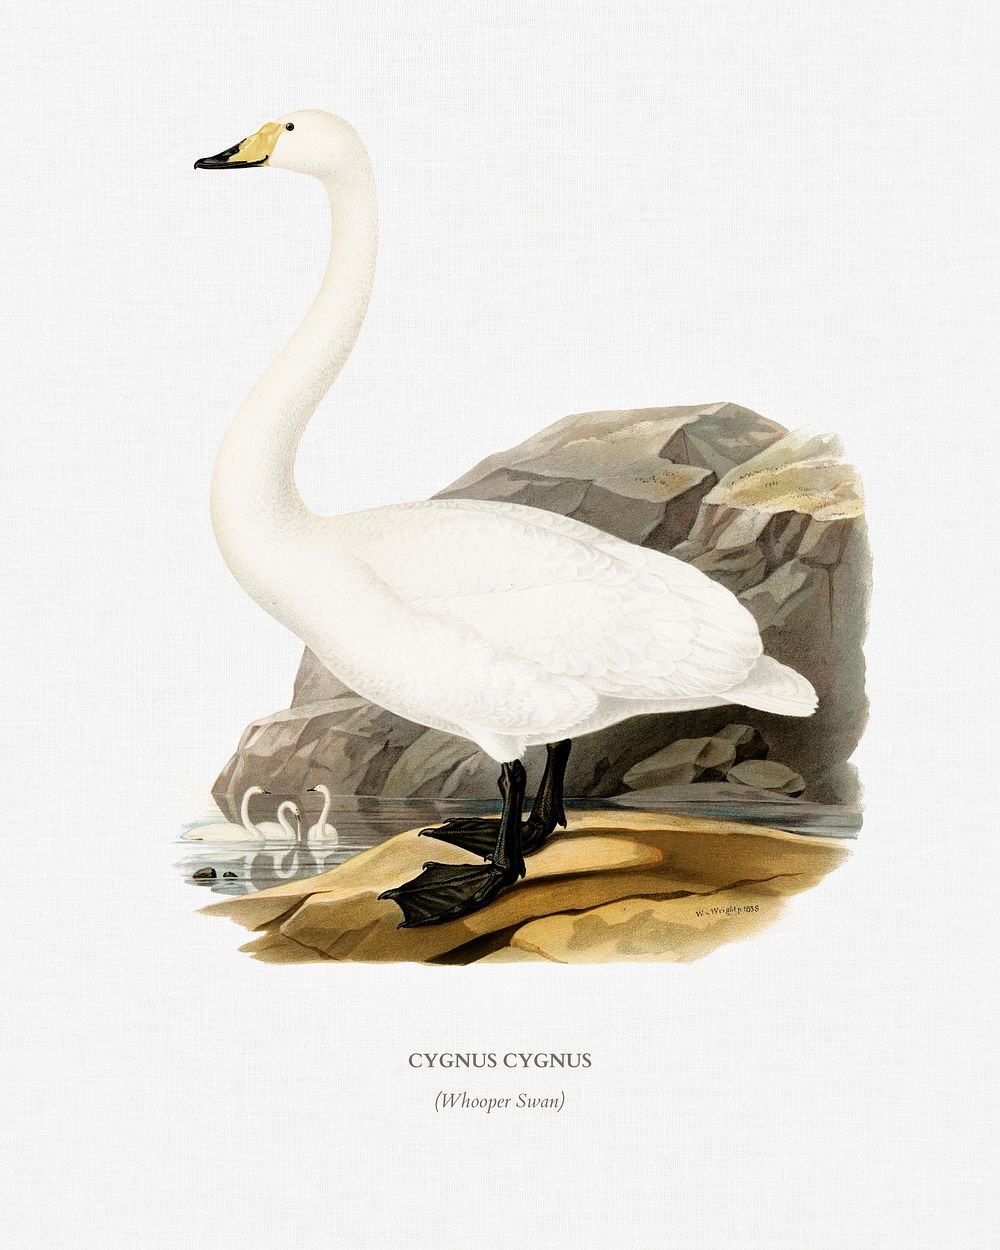 Whooper Swan (Cygnus cygnus) illustrated by the von Wright brothers. Digitally enhanced from our own 1929 folio version of…